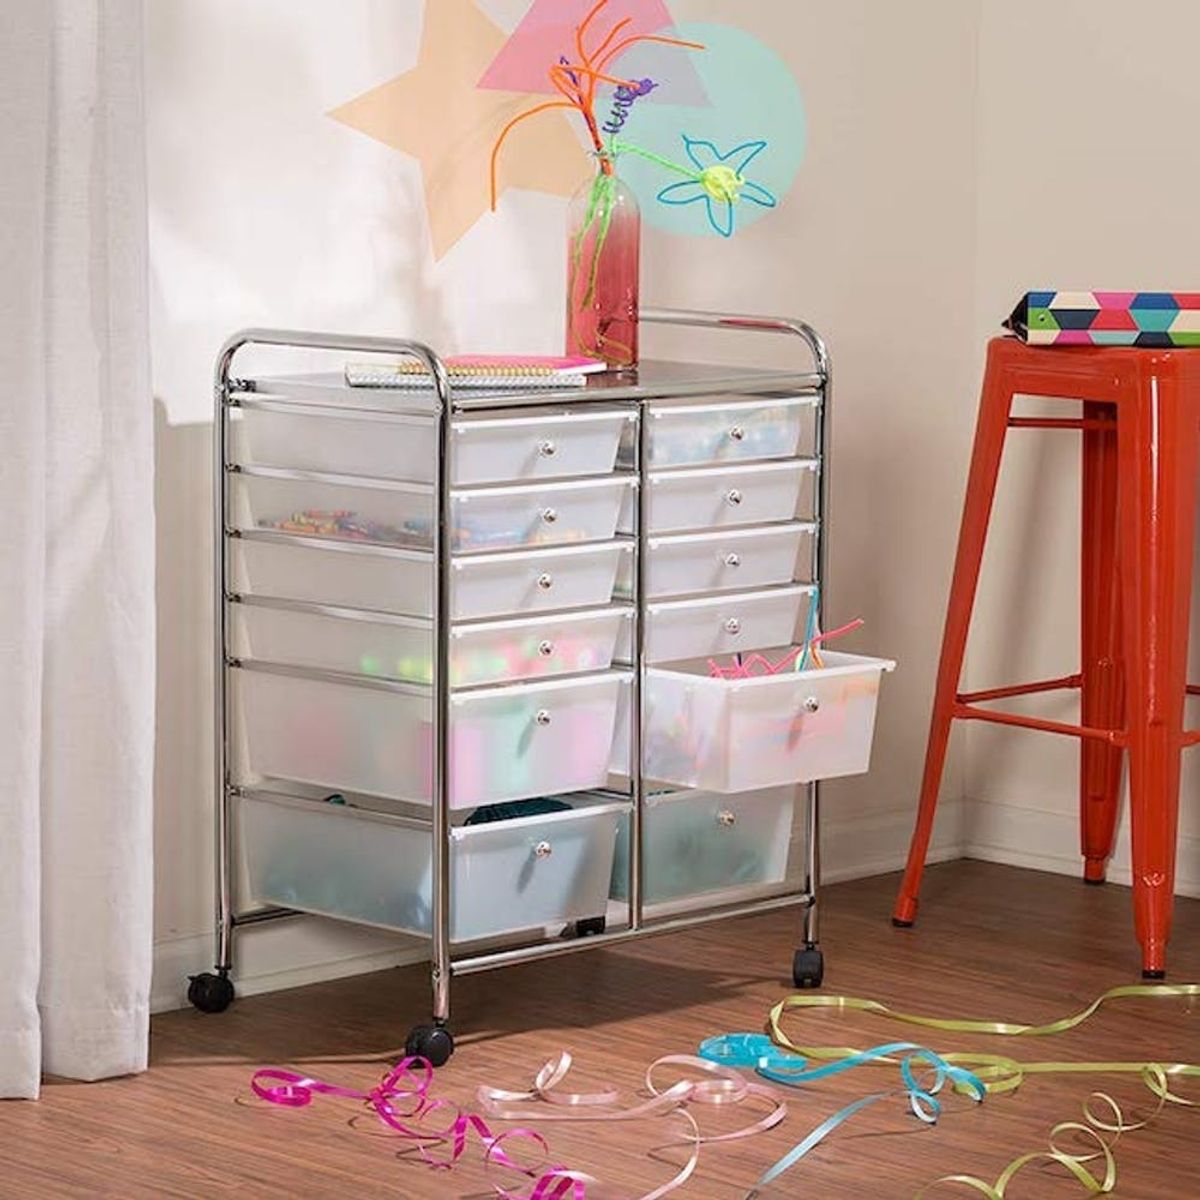 10 Space-Saving Storage Solutions for Dorm Rooms